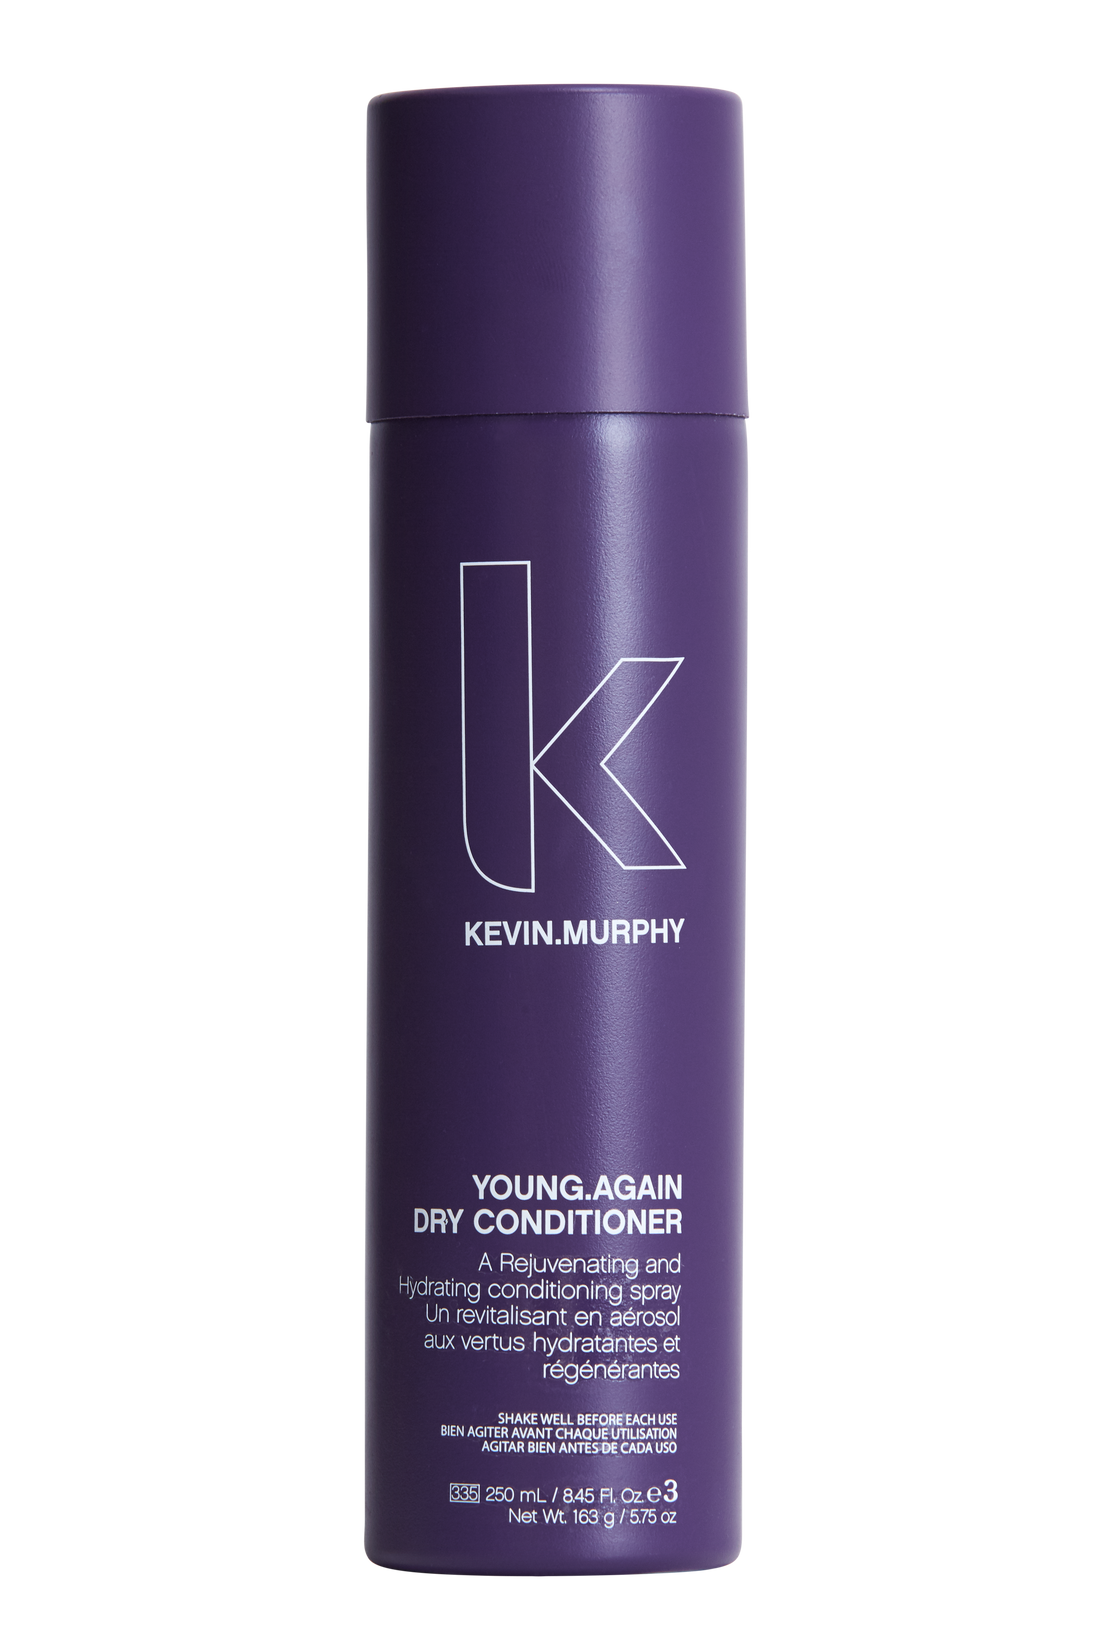 KEVIN MURPHY YOUNG AGAIN DRY CONDITIONER